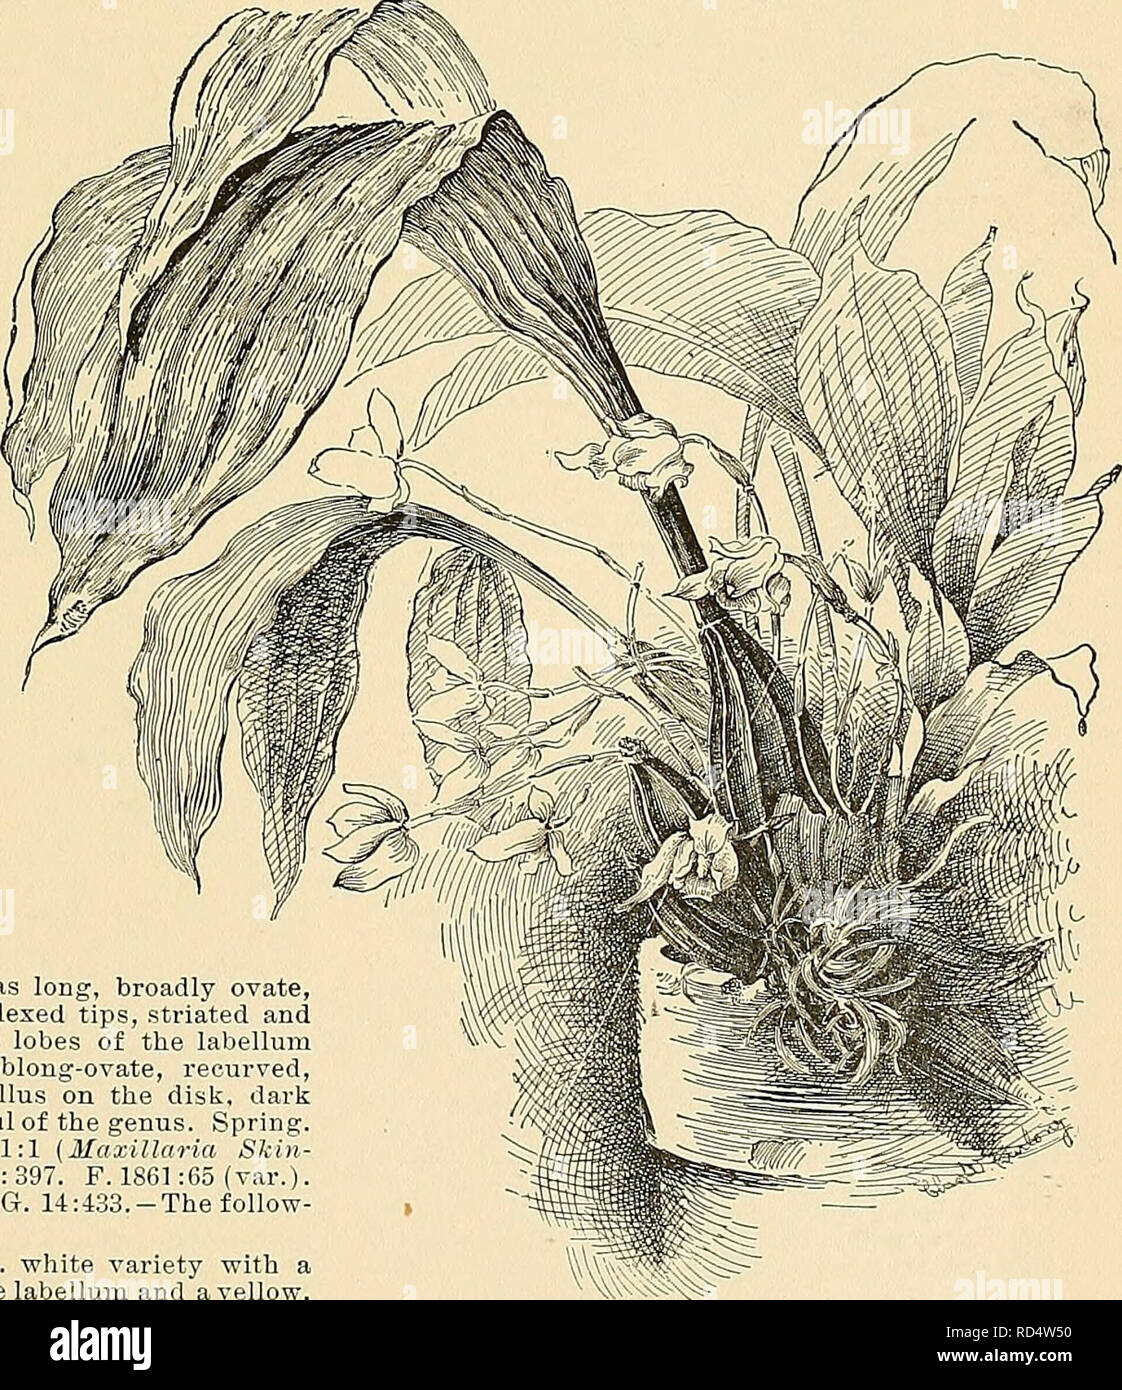 . Cyclopedia of American horticulture, comprising suggestions for cultivation of horticultural plants, descriptions of the species of fruits, vegetables, flowers, and ornamental plants sold in the United States and Canada, together with geographical and biographical sketches. Gardening. LYCASTE LYCASTE 953 crenulate; callus tongue-shaped, concave. Often the parts of the flower are more or less spotted and hairy in places. July, Aug. Colombia. Gt. 1321. 5. Idnipes, Lindl. Pseudobulbs large: Irs. lanceo- late, 12-18 in. long: fls. solitary, as many as 15 on a plant, creamy white; sepals and peta Stock Photo